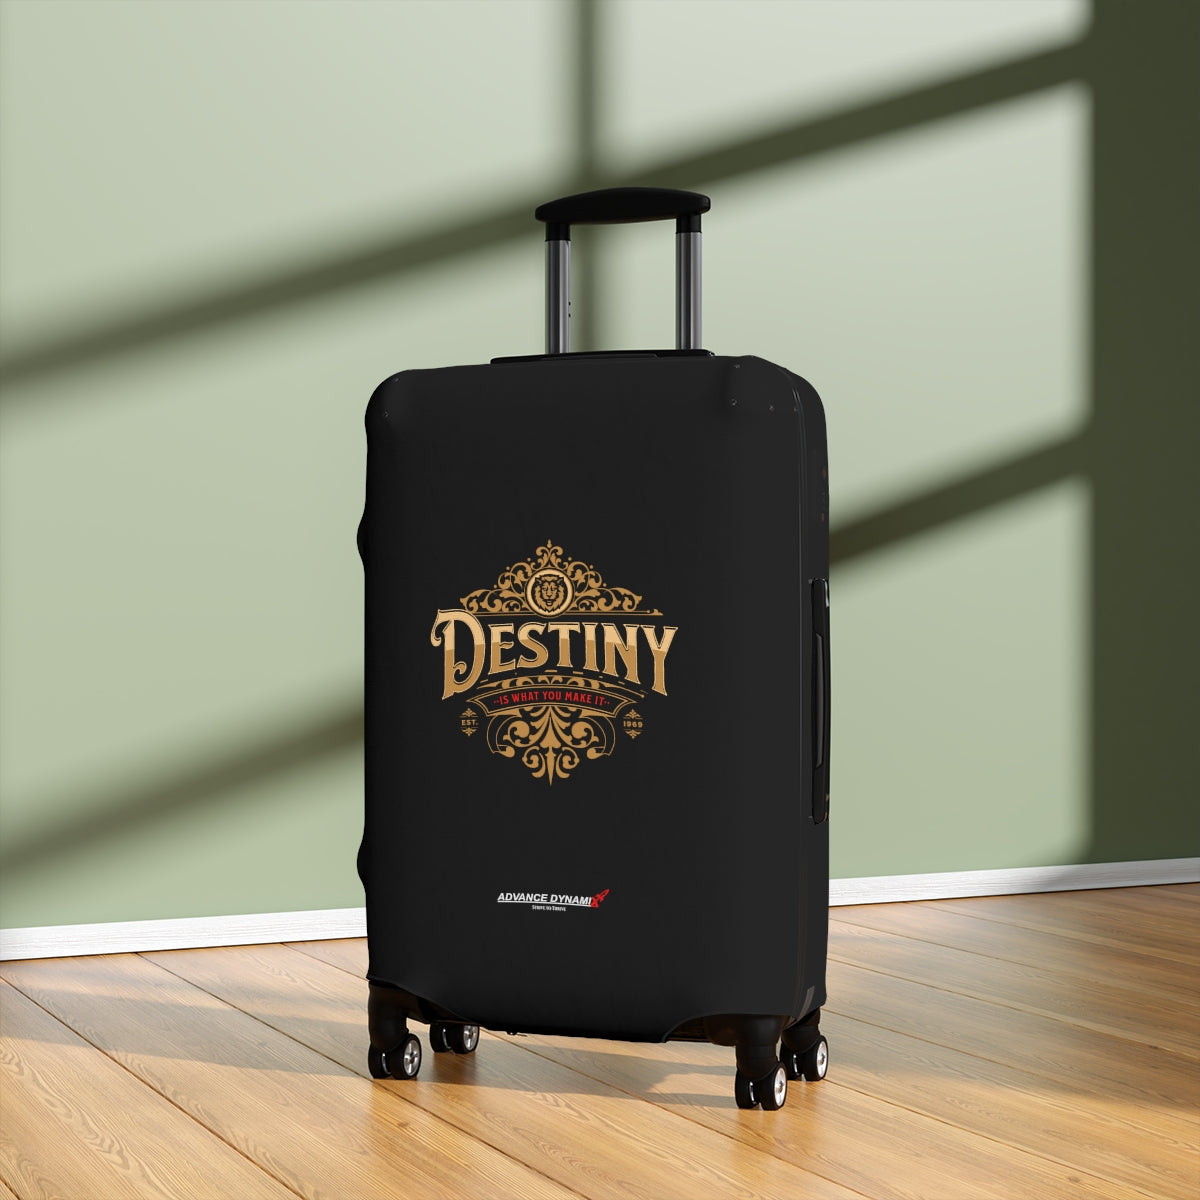 Destiny is what you make it - Luggage Covers Infused with Advance Dynamix Add-A-Tude - Tell the world!